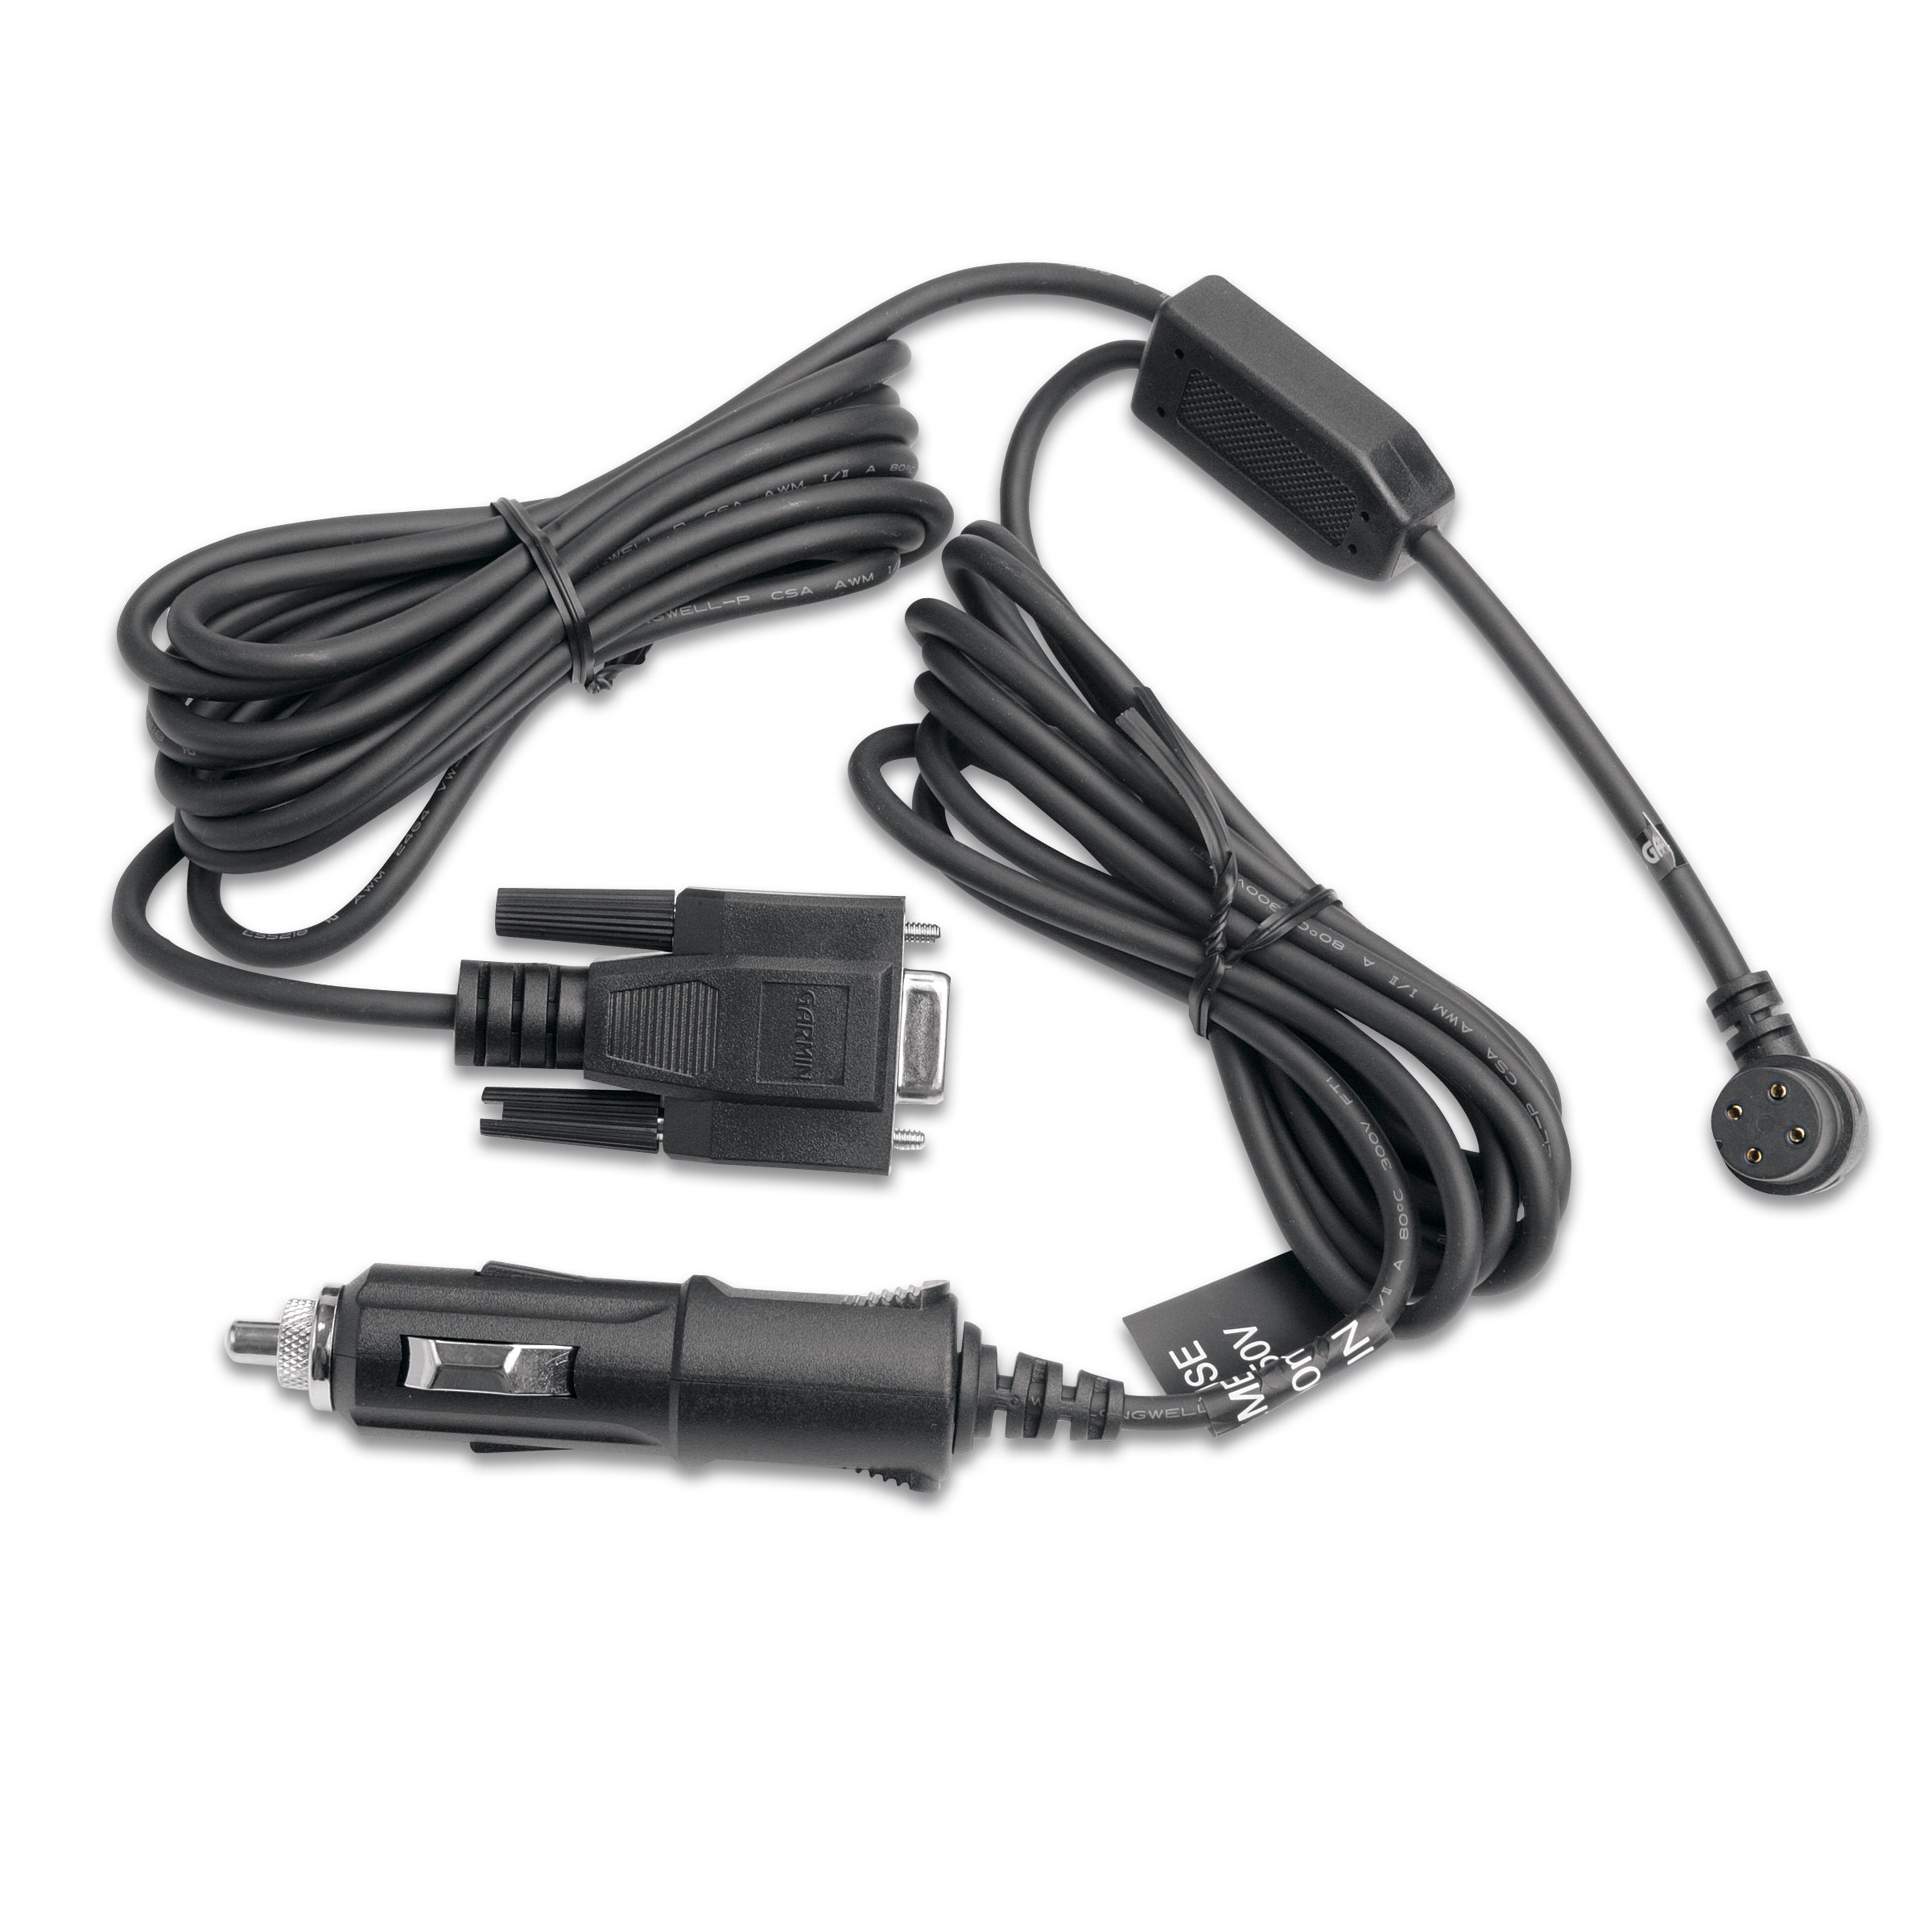 Garmin Power cable for vehicle with PC interface